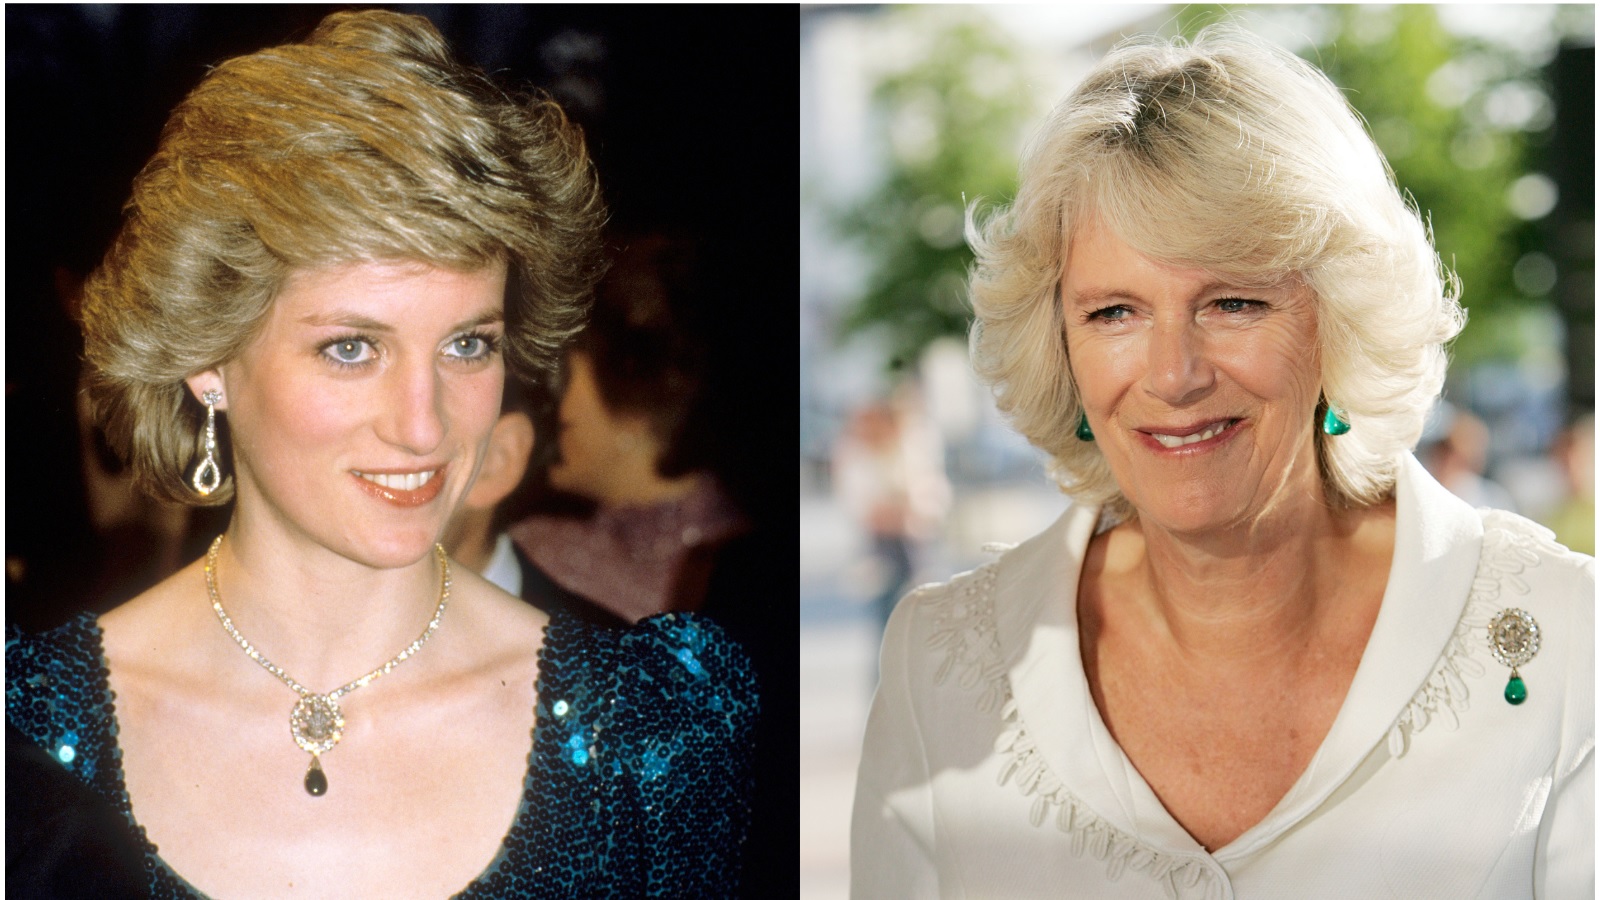 Camilla's 'unflinching' response to Diana's 'bold' confrontation over Charles affair